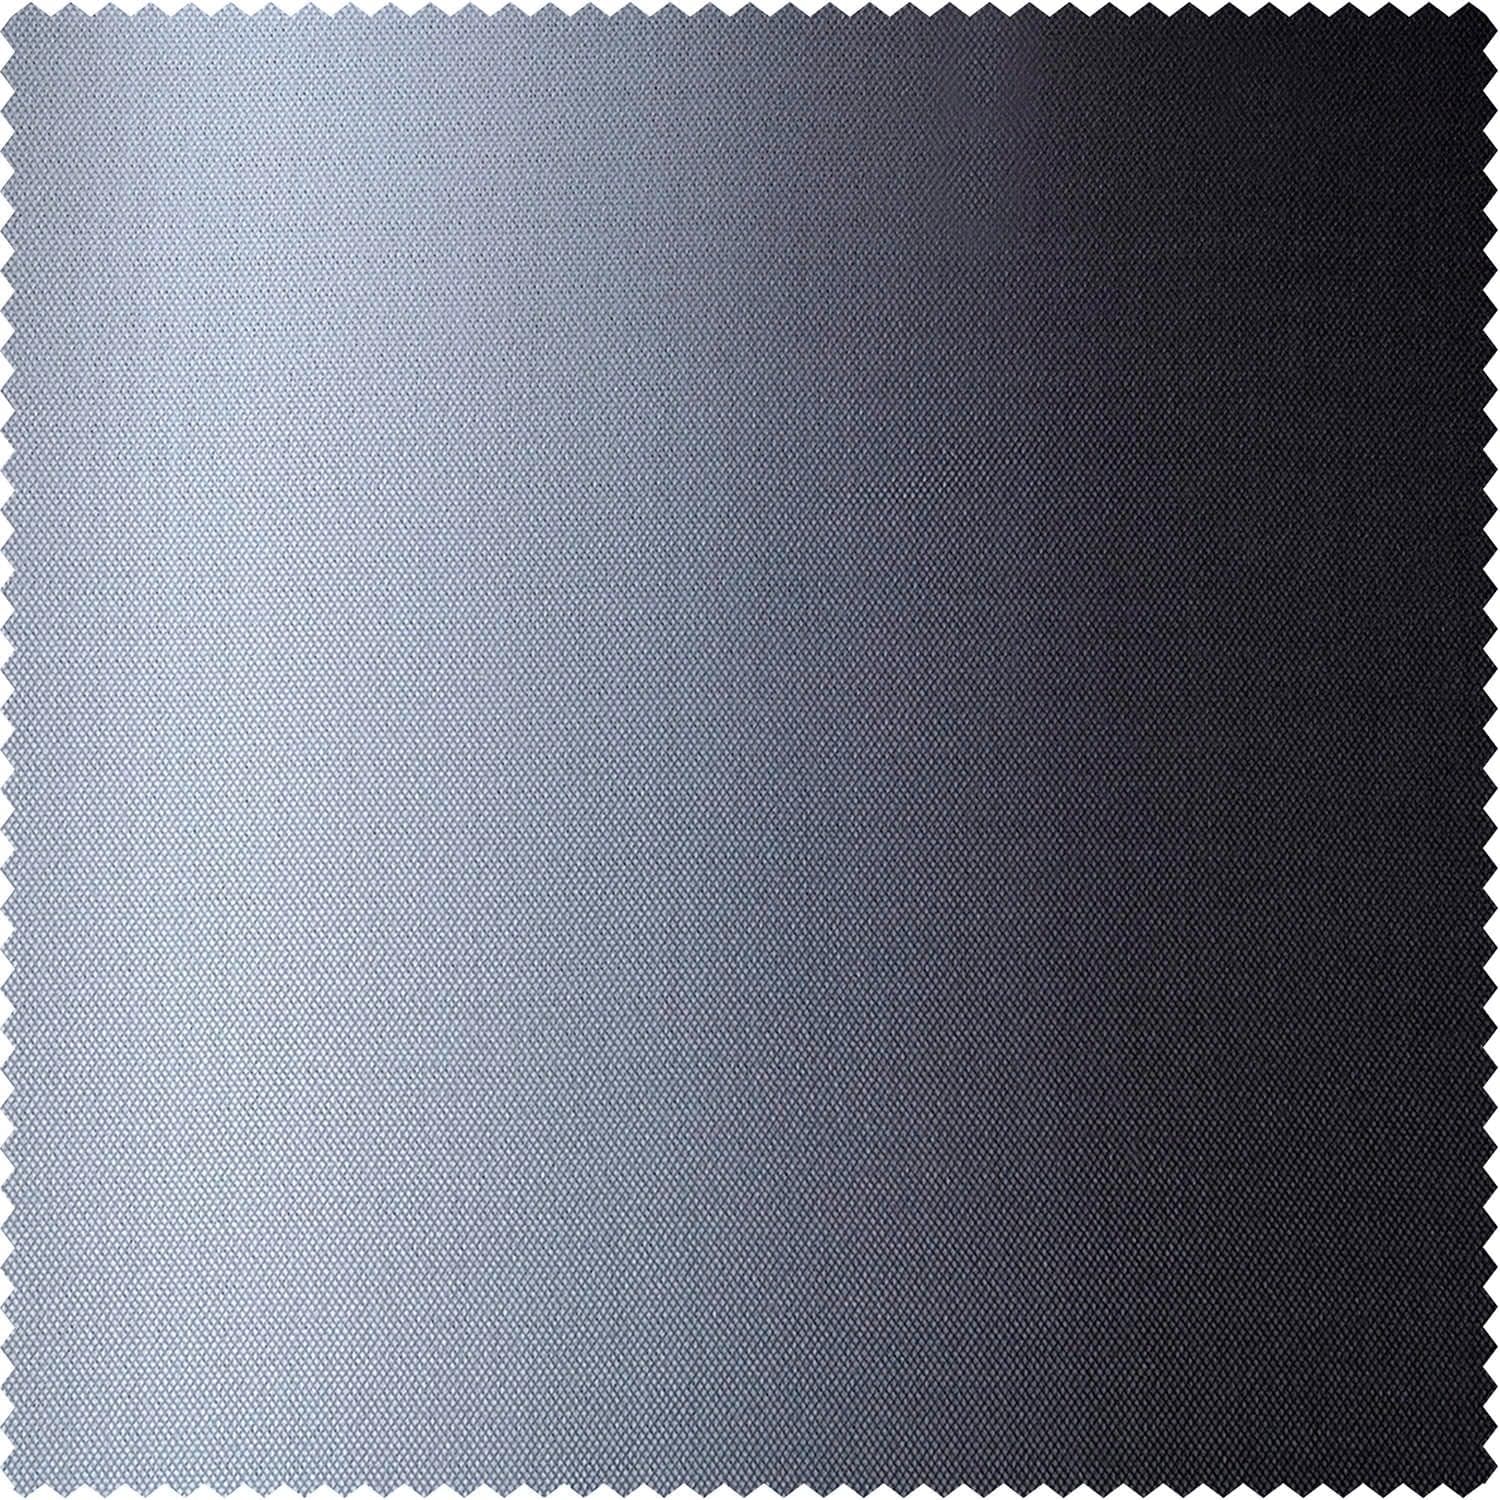 Parallel Grey Printed Faux Linen Swatch